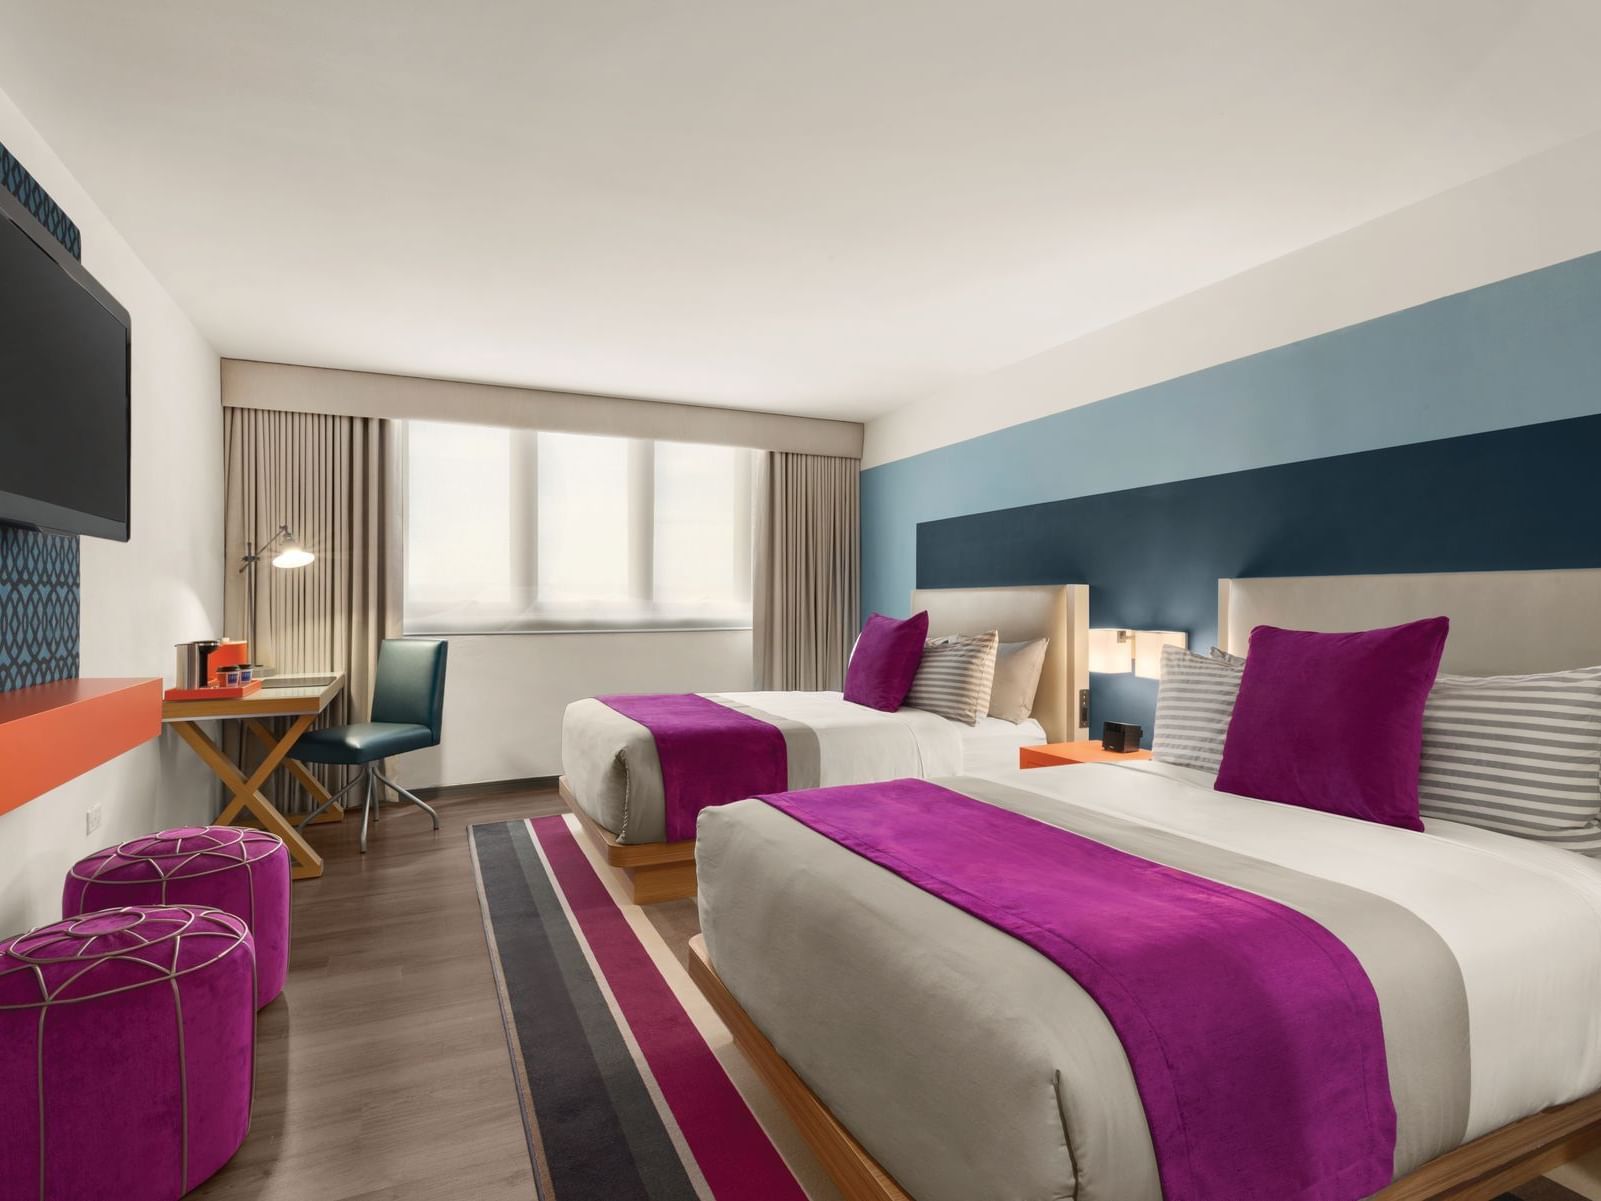 TRYP by Wyndham Isla Verde hotel room with two double beds, desk and television on wall